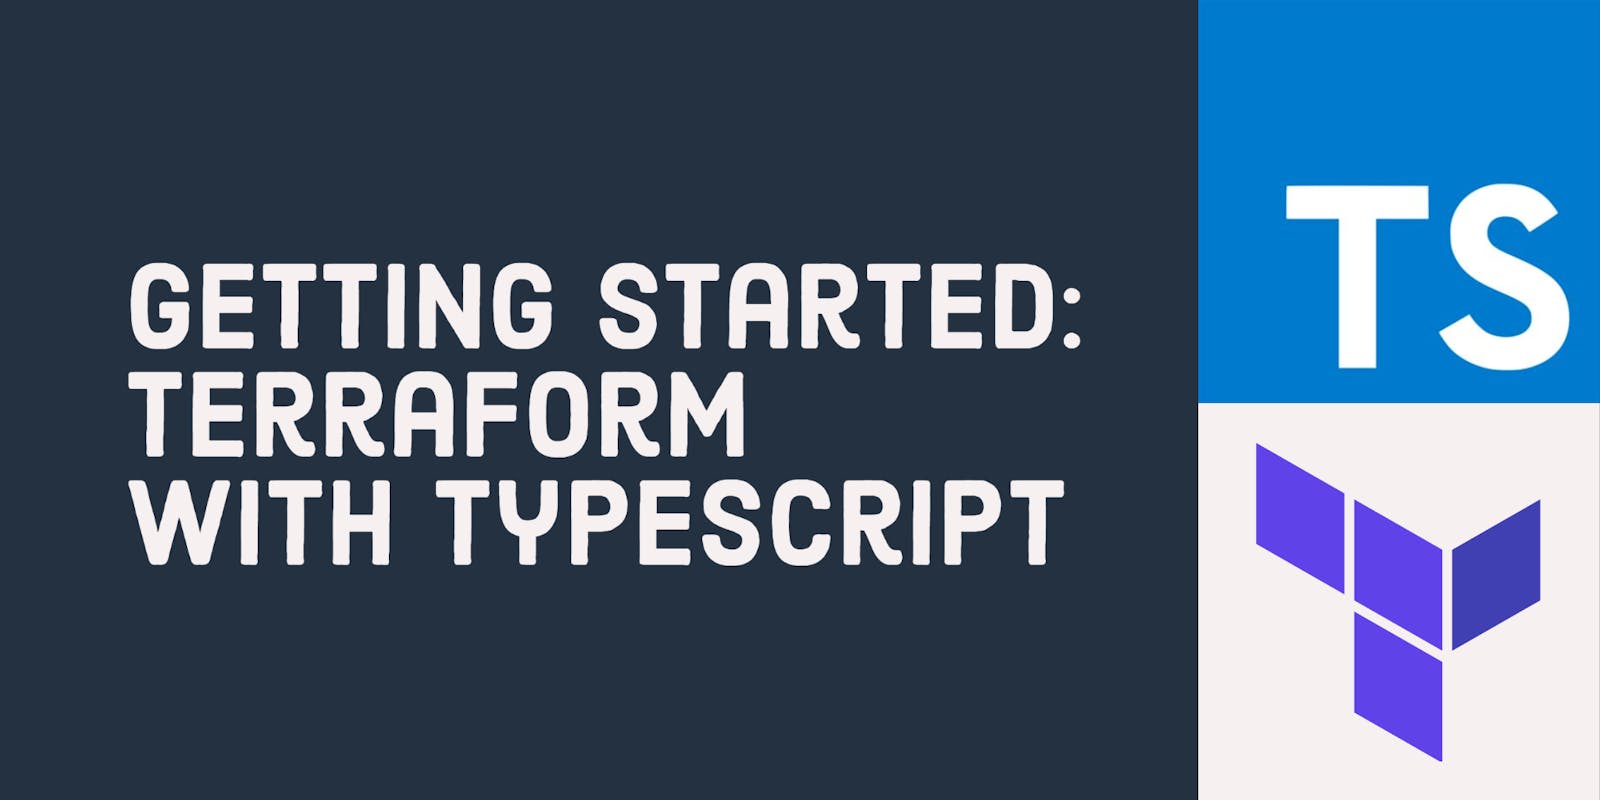 Getting Started: Terraform with Typescript